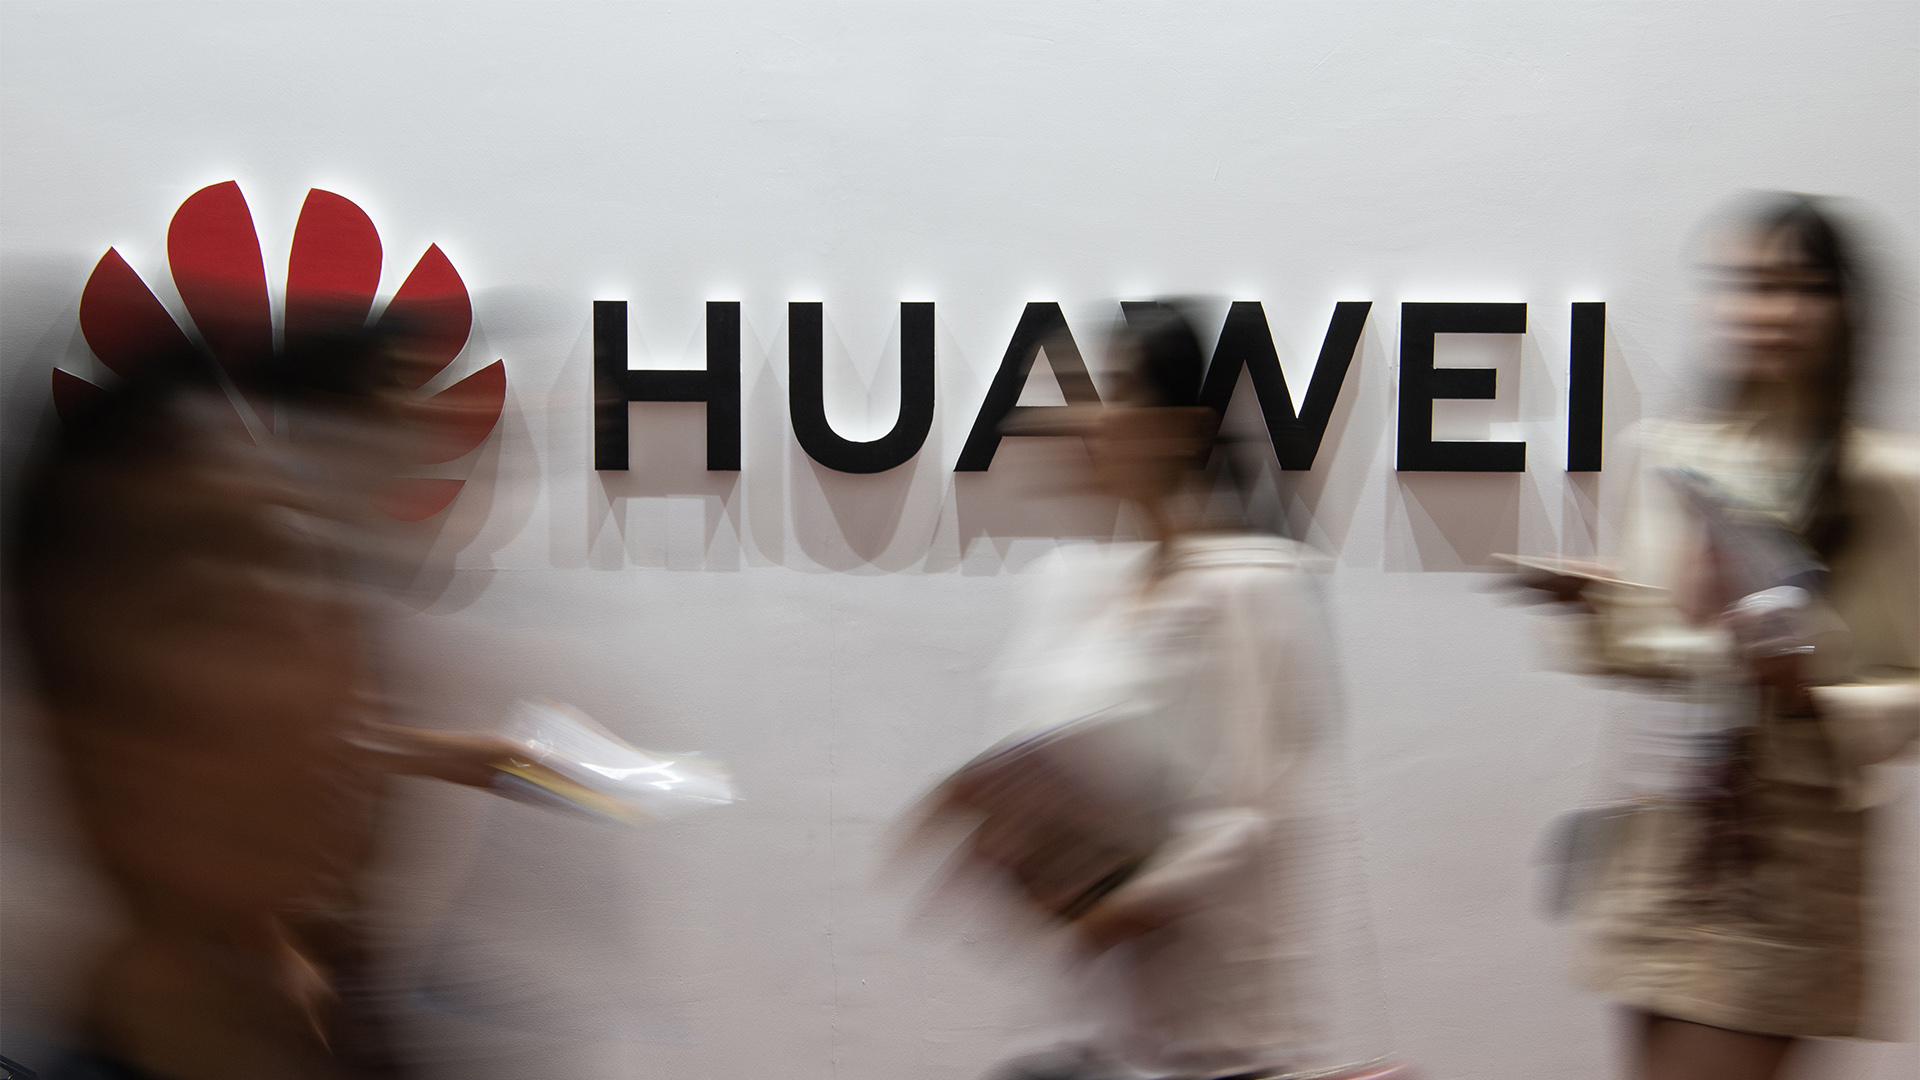 Global security concerns: Chinese telecoms giant Huawei is under pressure